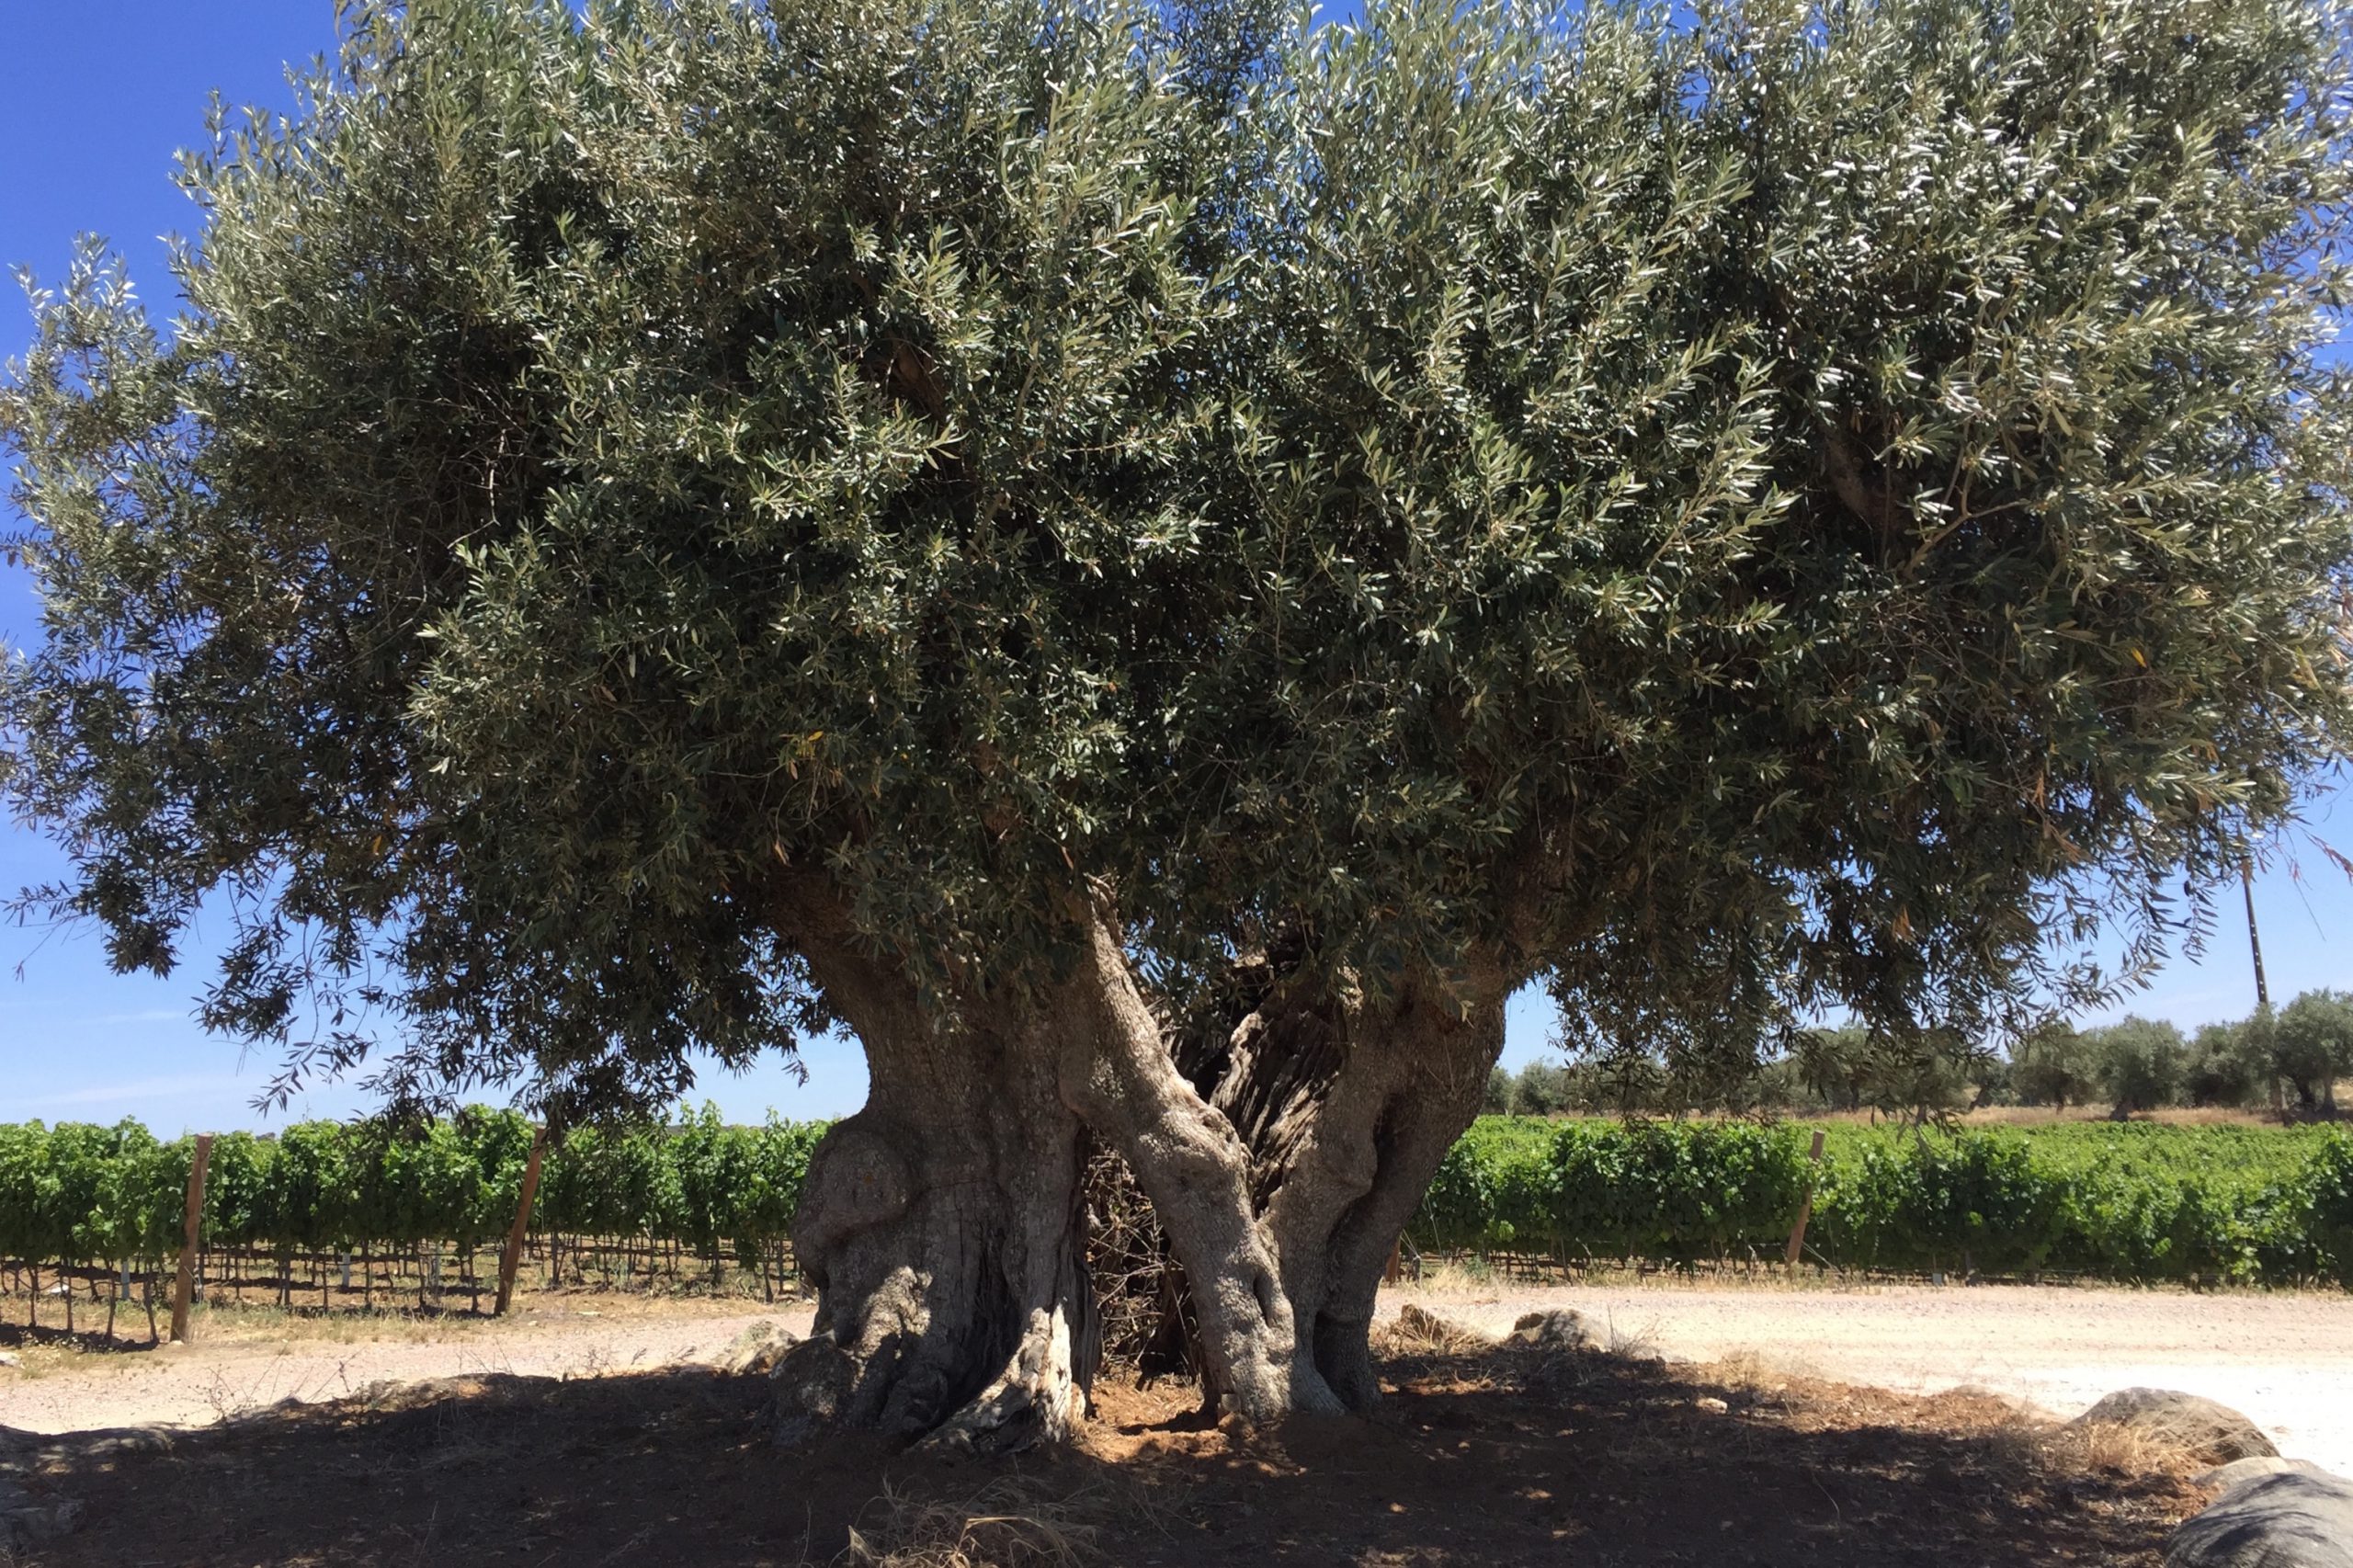 Herdade do Freixo Olive Tree 2000 years old